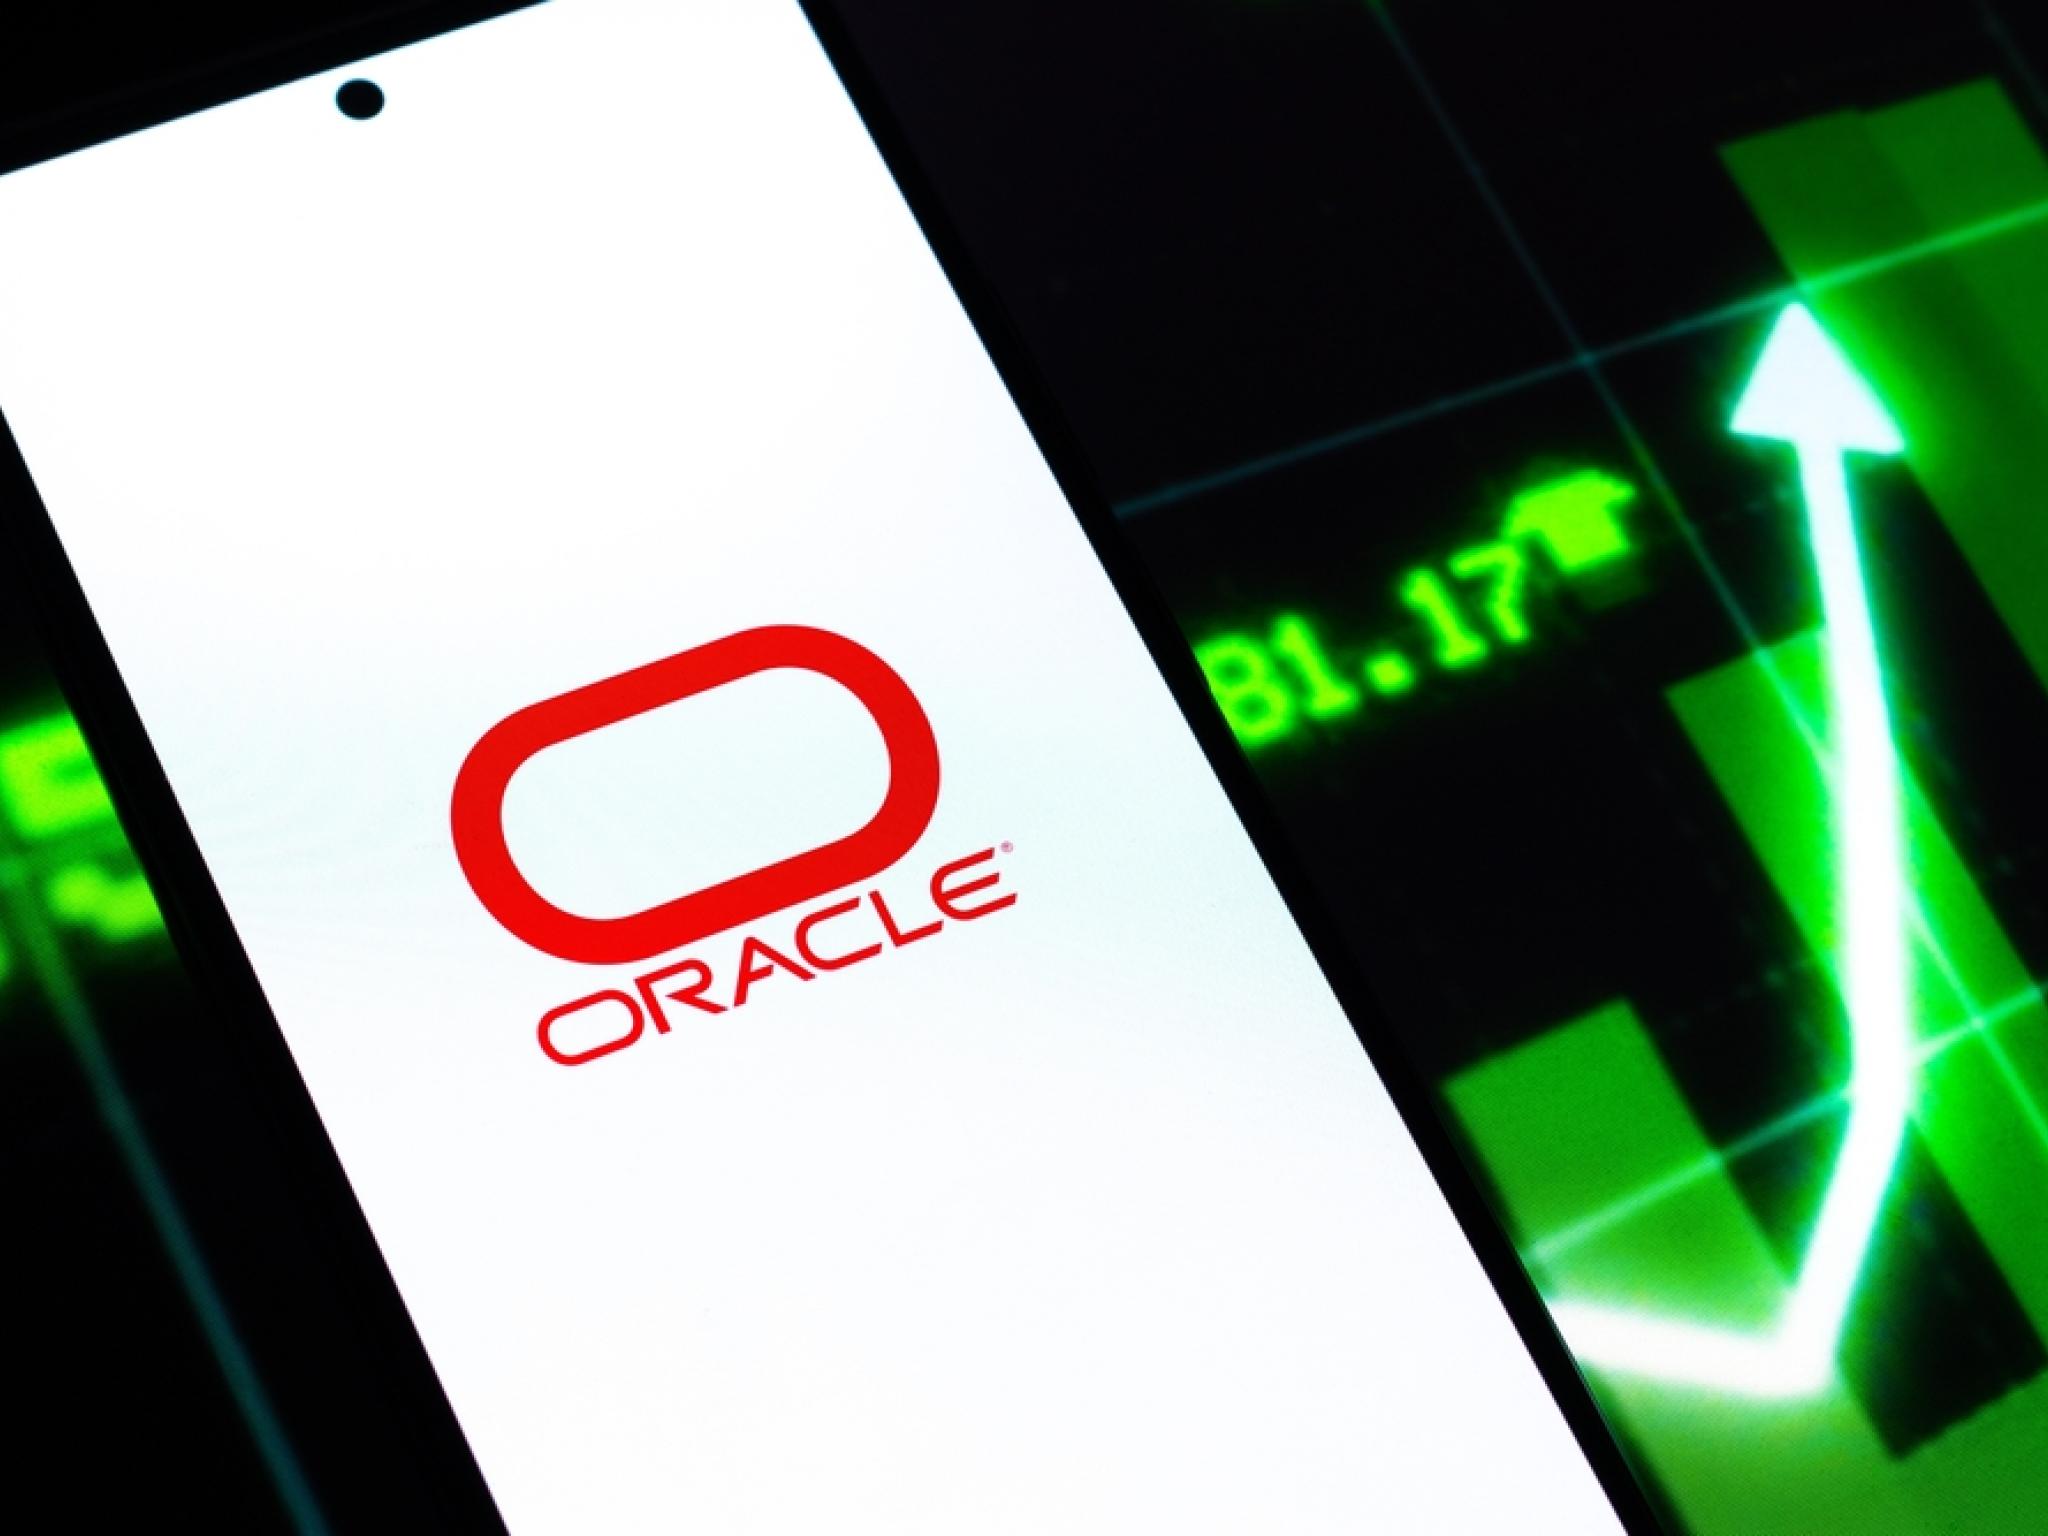  oracle-broadcom-and-other-3-key-stocks-to-watch-on-wednesday 